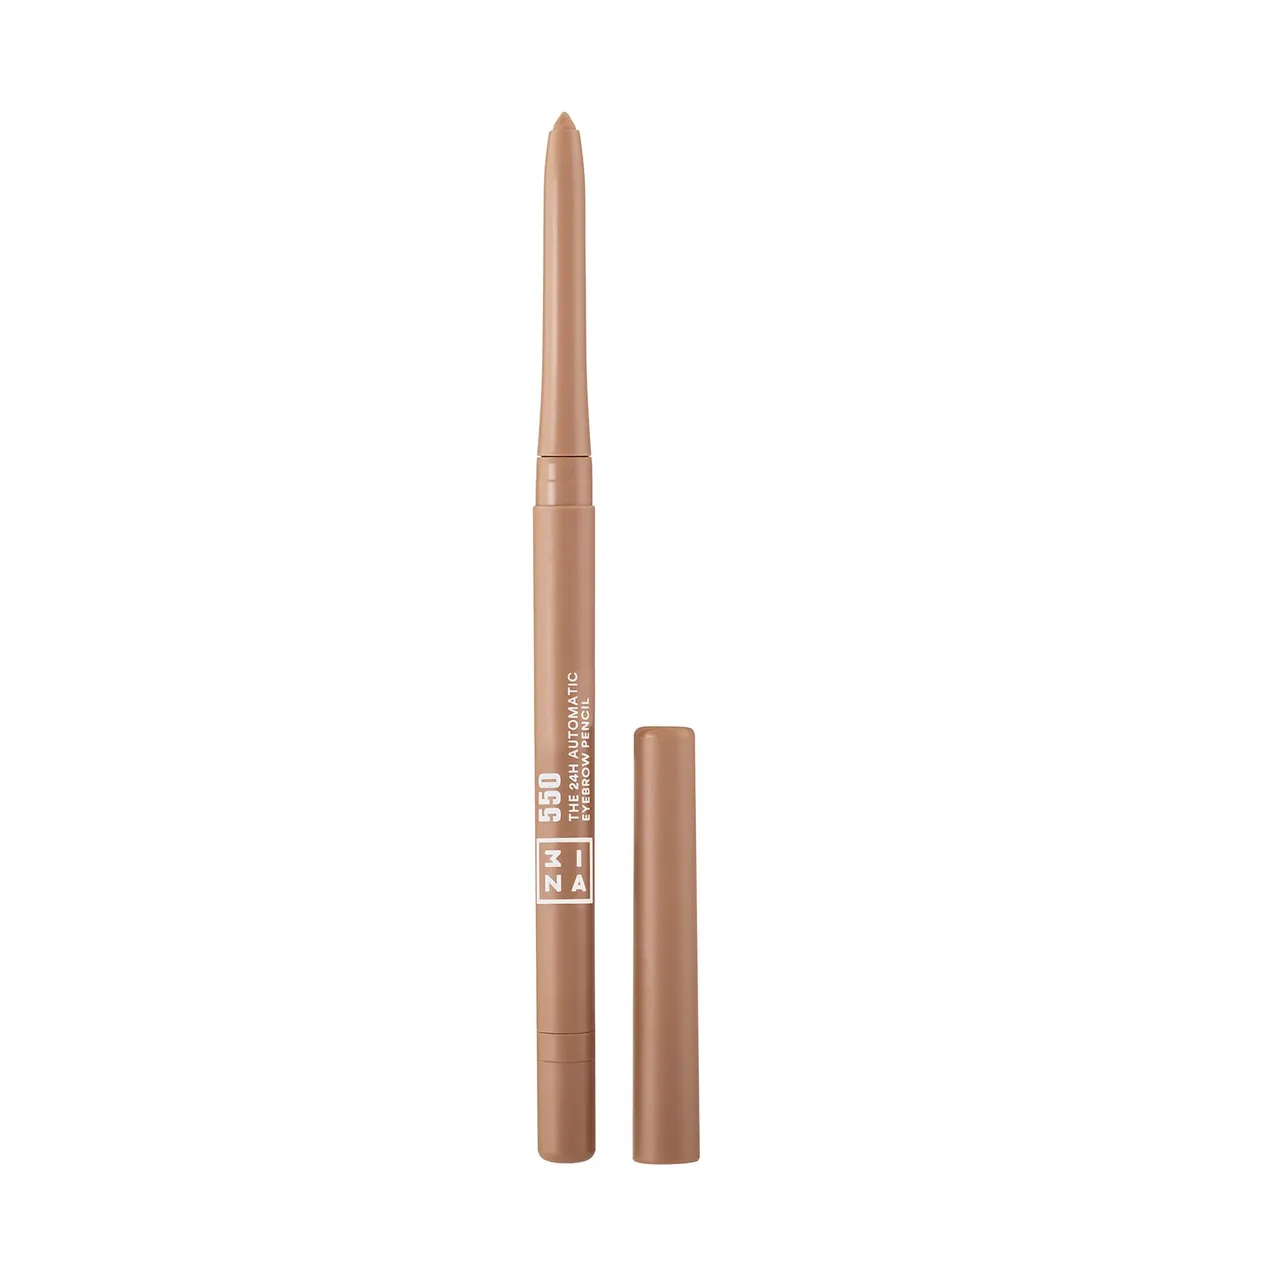 3INA MAKEUP - The 24H Automatic Eyebrow Pencil 550 - Blonde